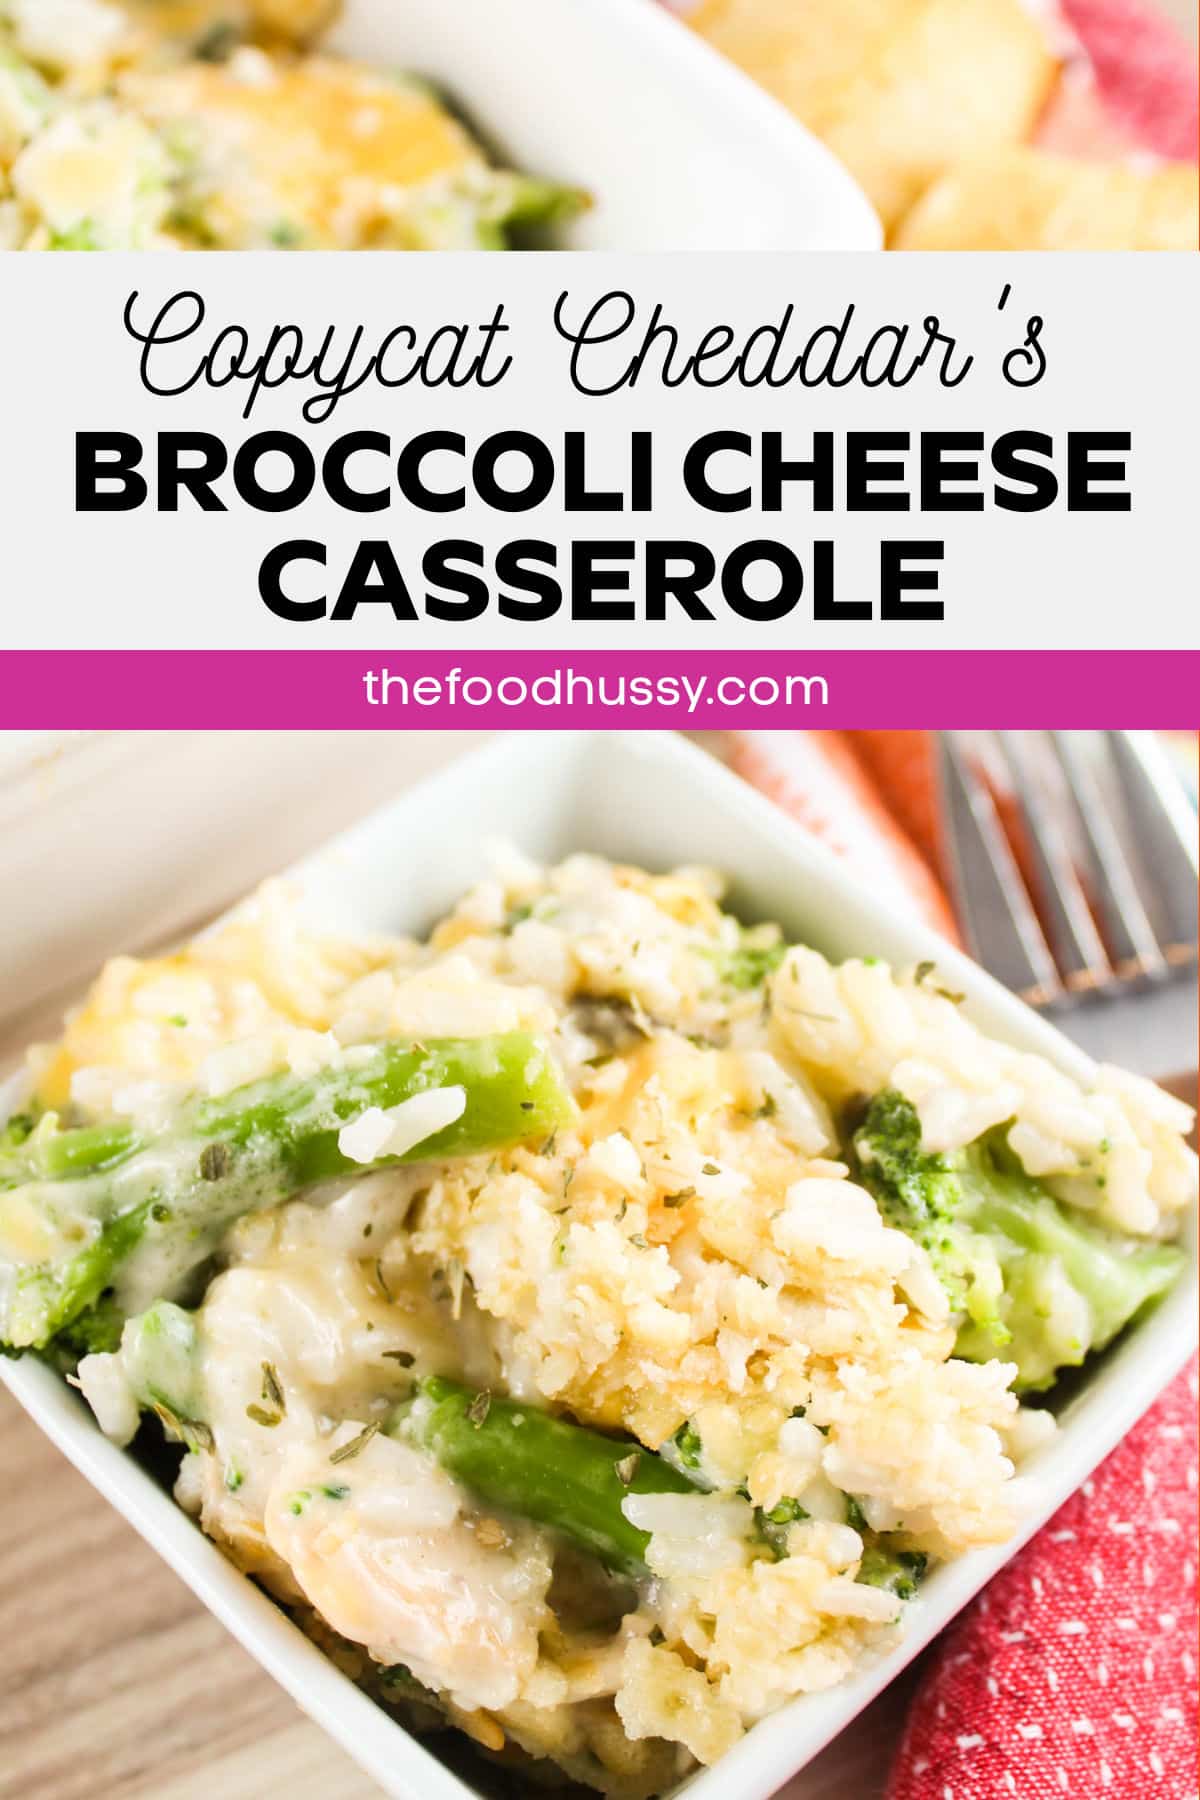 Cheddars Broccoli Cheese Casserole is a delicious and easy-to-make side dish for weeknights or any holiday table! Loaded with broccoli, rice, Velveeta and - of course - a little butter! ;-)  via @foodhussy